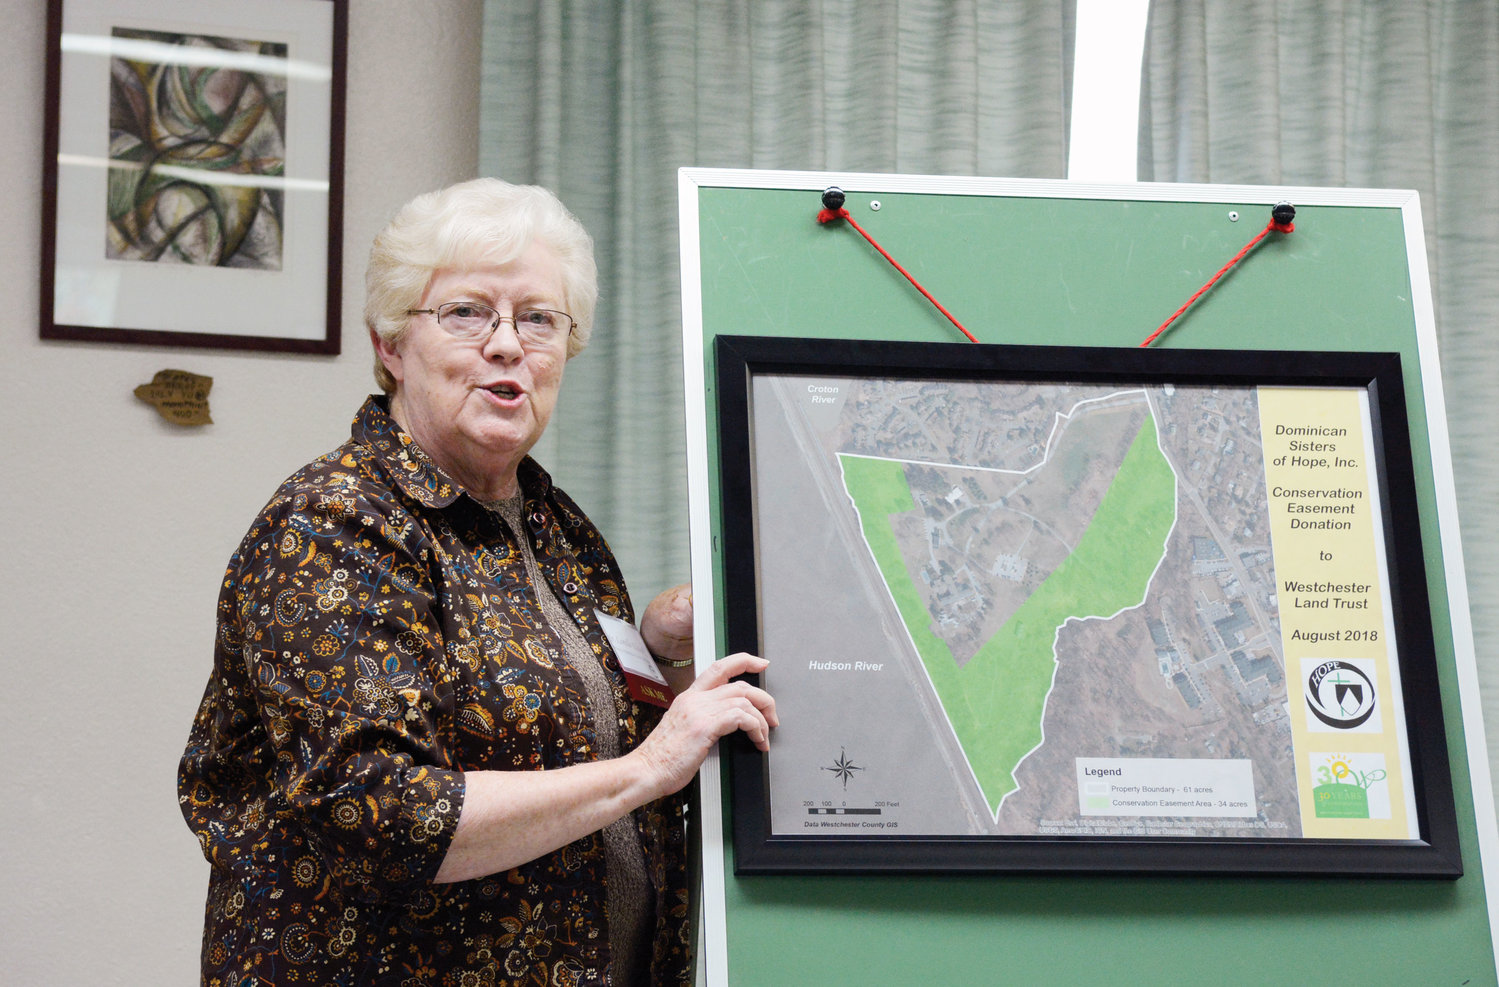 Sister Lorelle Elcock, O.P., prioress of the Dominican Sisters of Hope, discusses the conservation easement, using a map of the property, at the press conference.